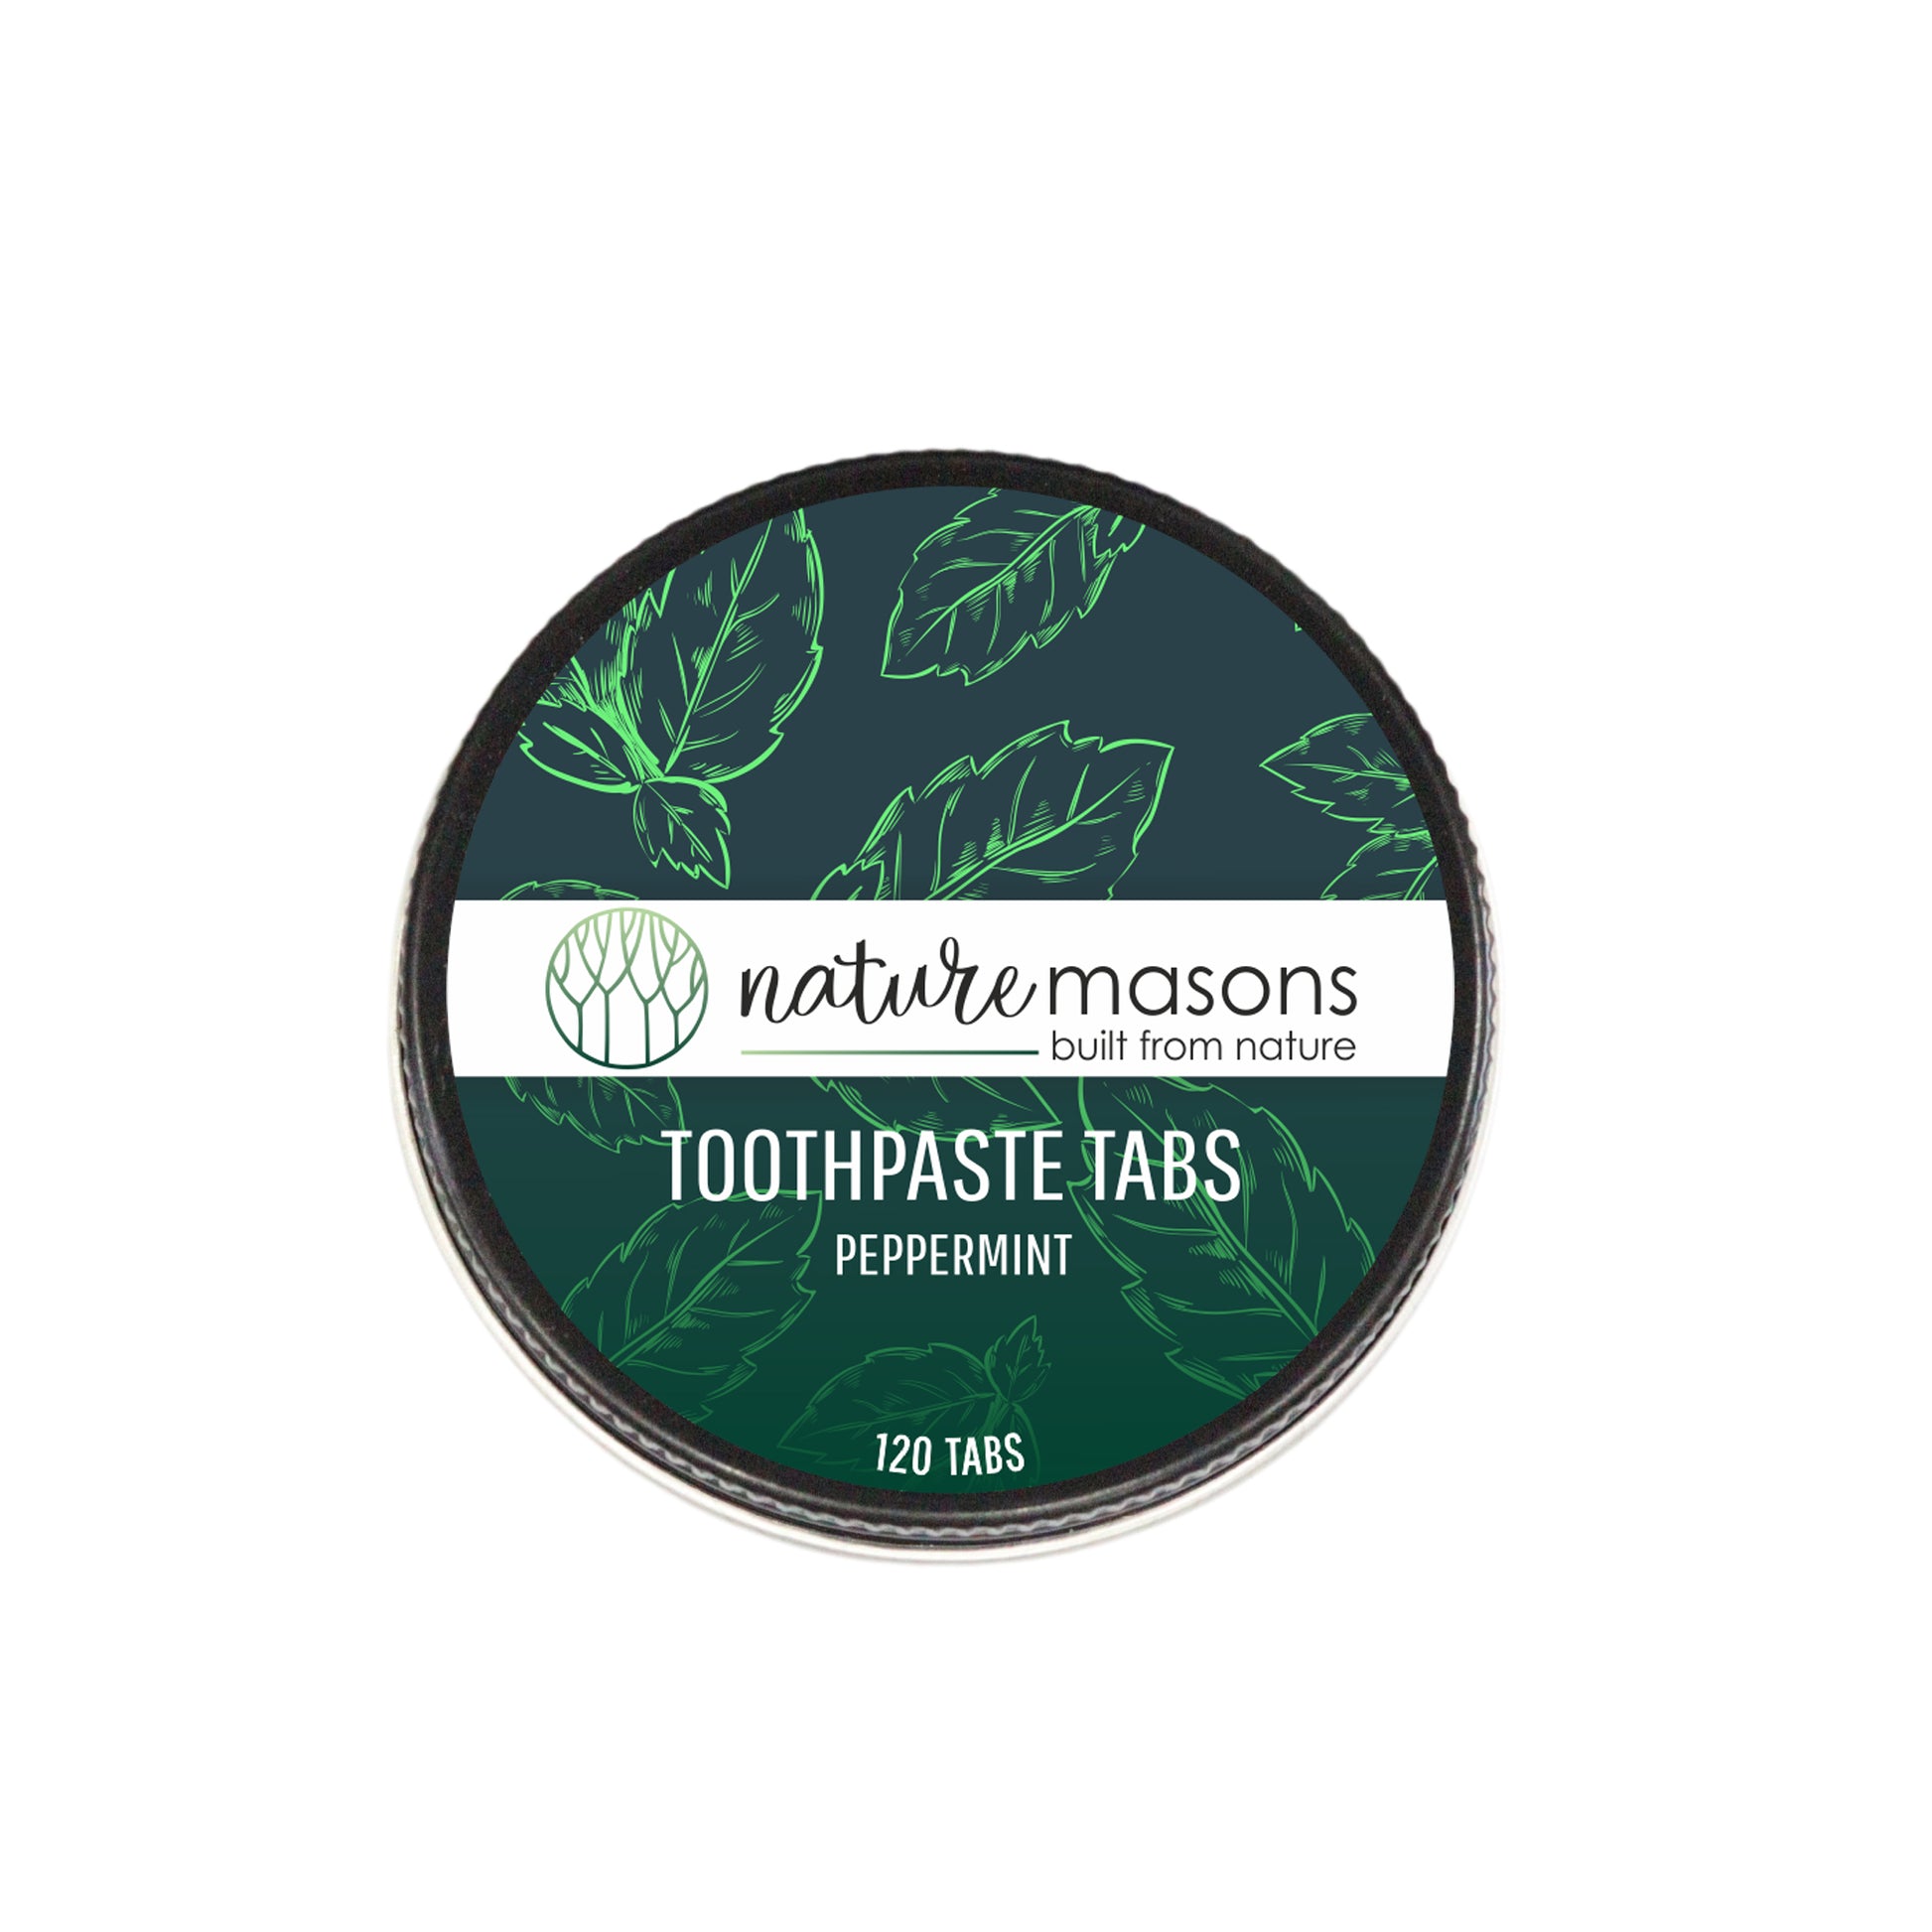 Toothpaste Tablets - Peppermint The Nature Masons